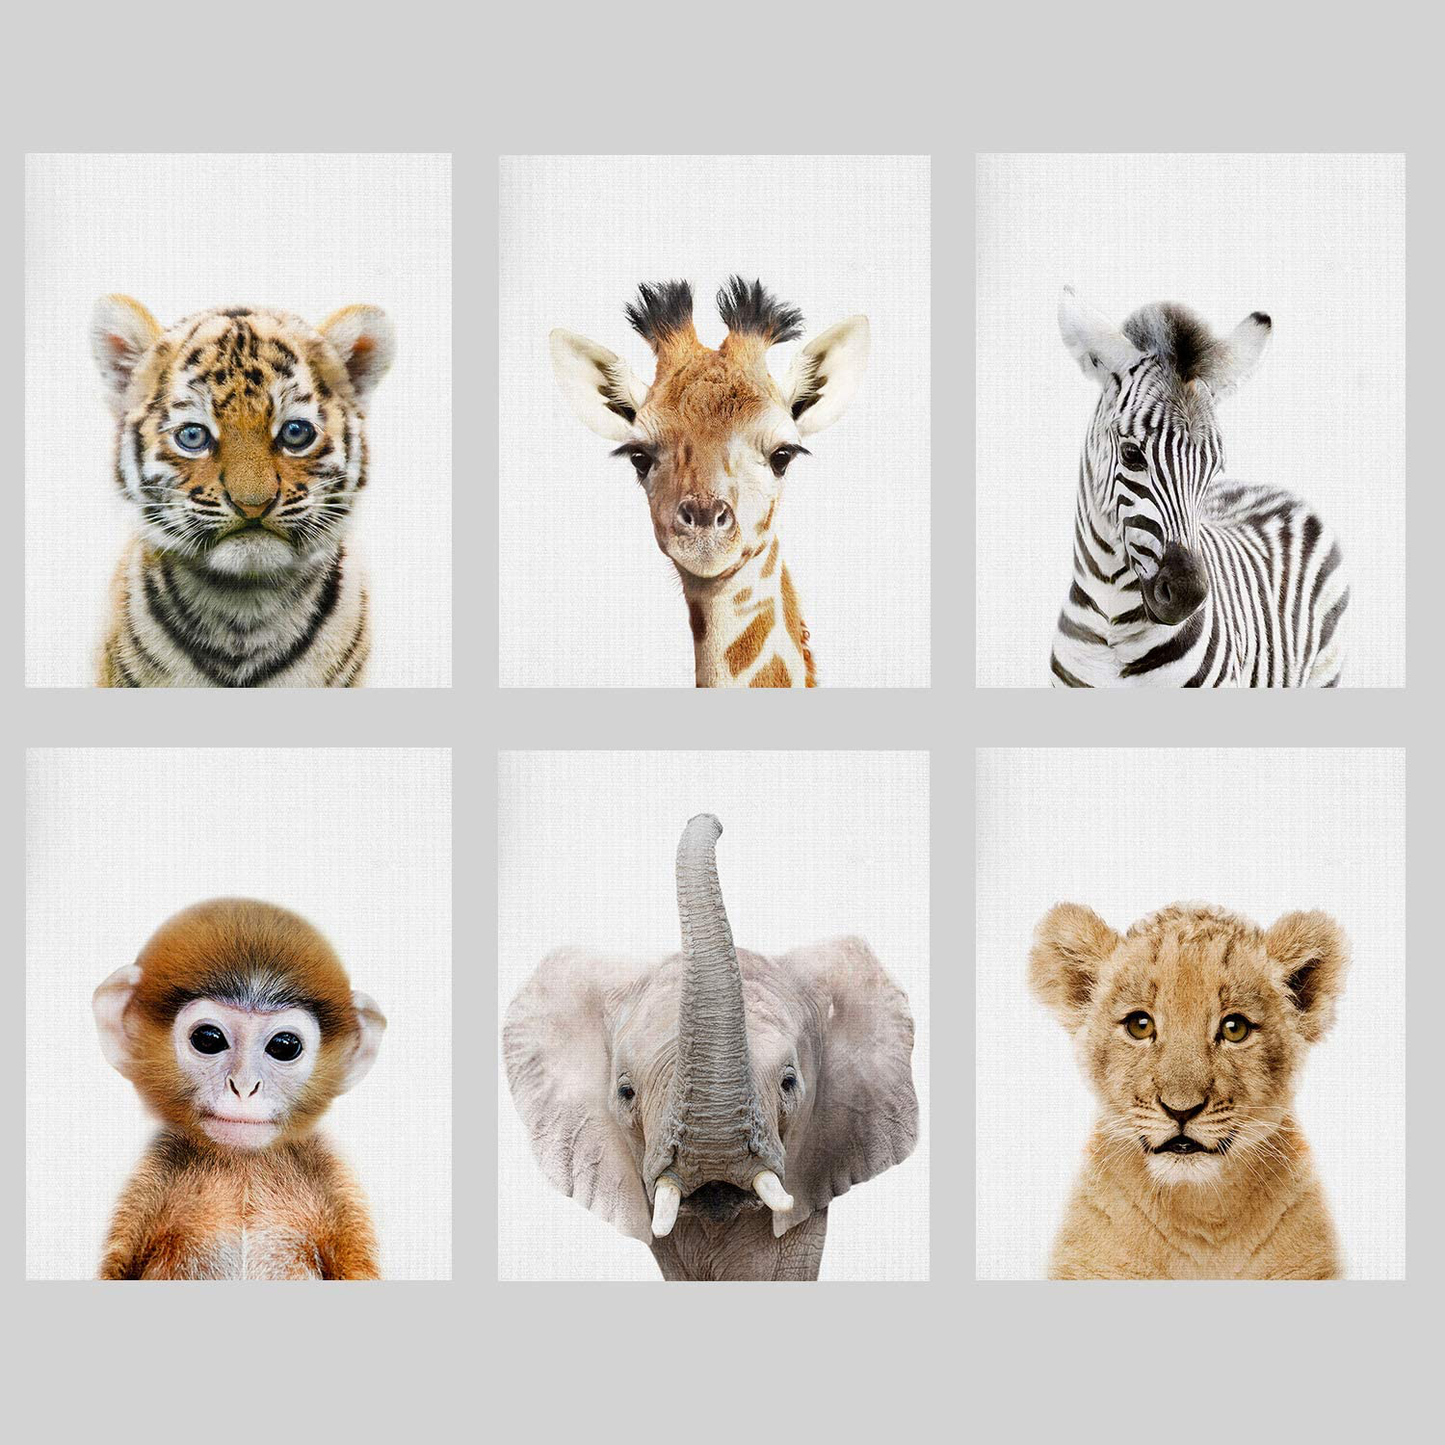 Baby Animal Posters and Prints - EPHANY ART YMX016 - Baby Nursery Decor Pictures Set of 6 (Unframed) Cute Animal Photography Wall Prints for Baby Boys & Girls Room YMX016 (8"x10"(20x25cm))